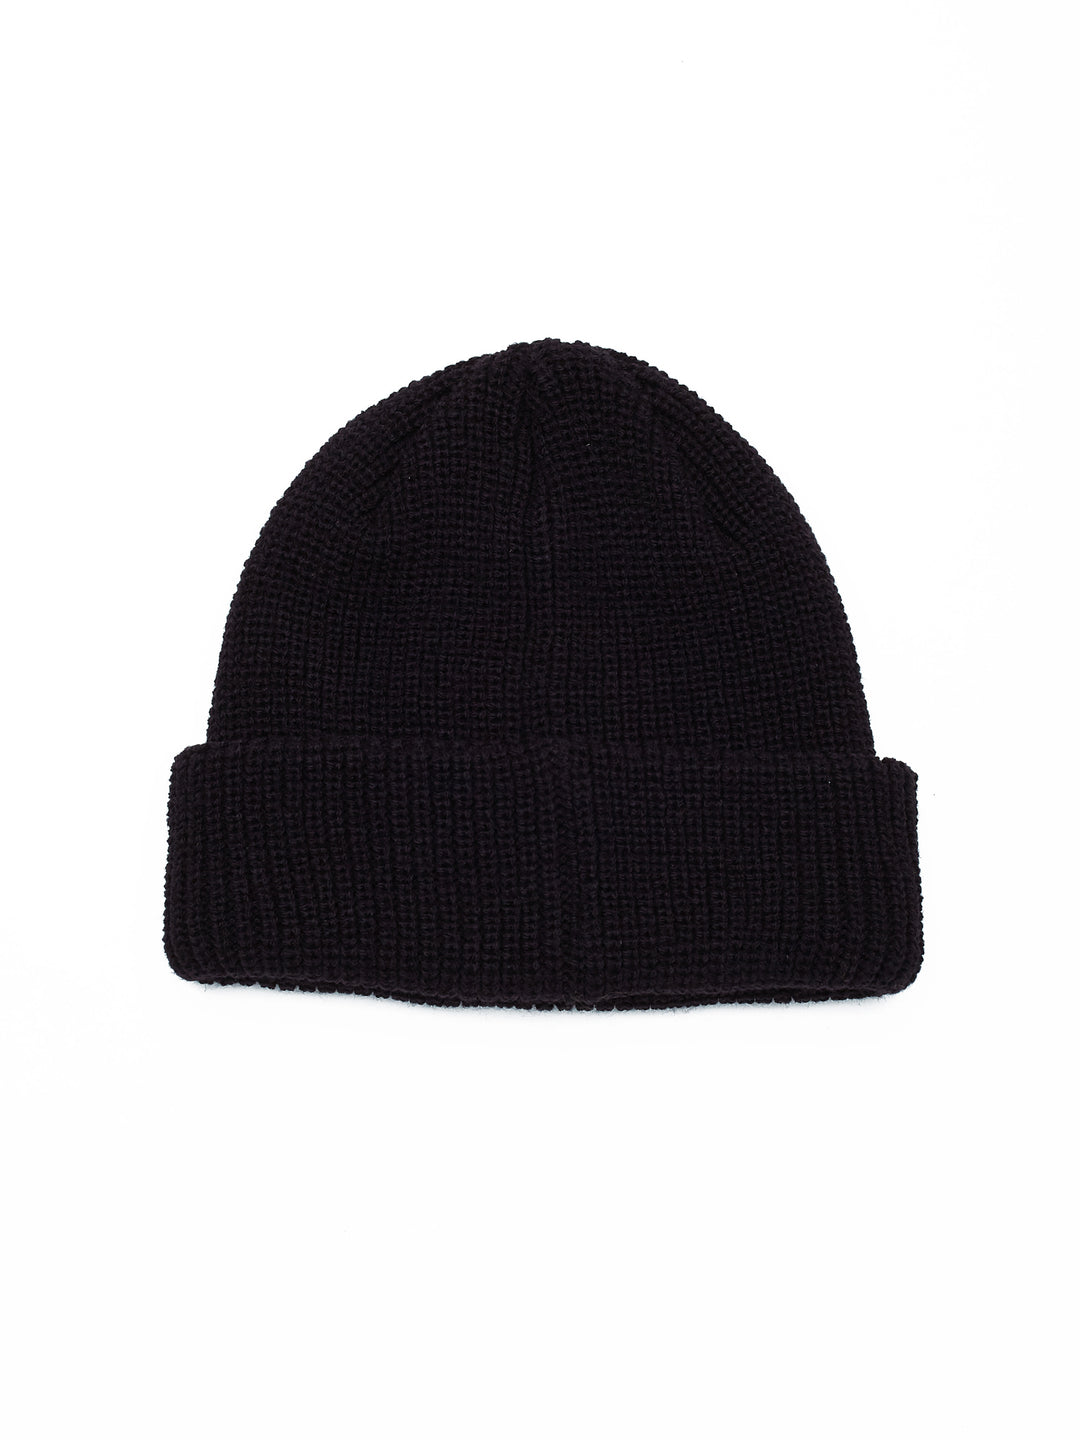 Jungle Beanie | Black - West of Camden - Main Image Number 2 of 2